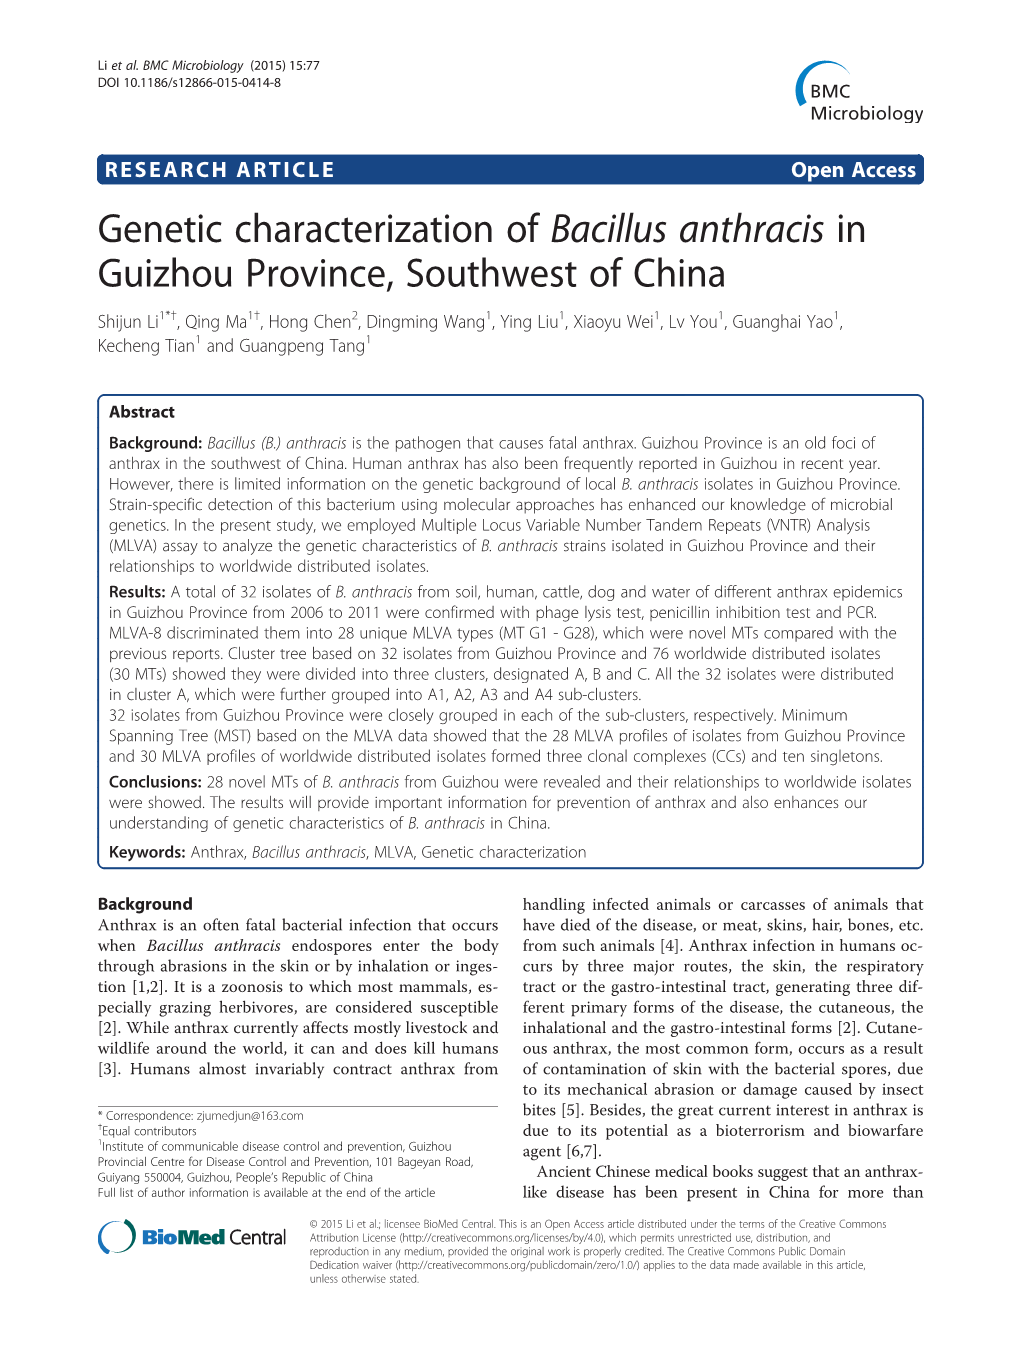 Genetic Characterization of Bacillus Anthracis in Guizhou Province